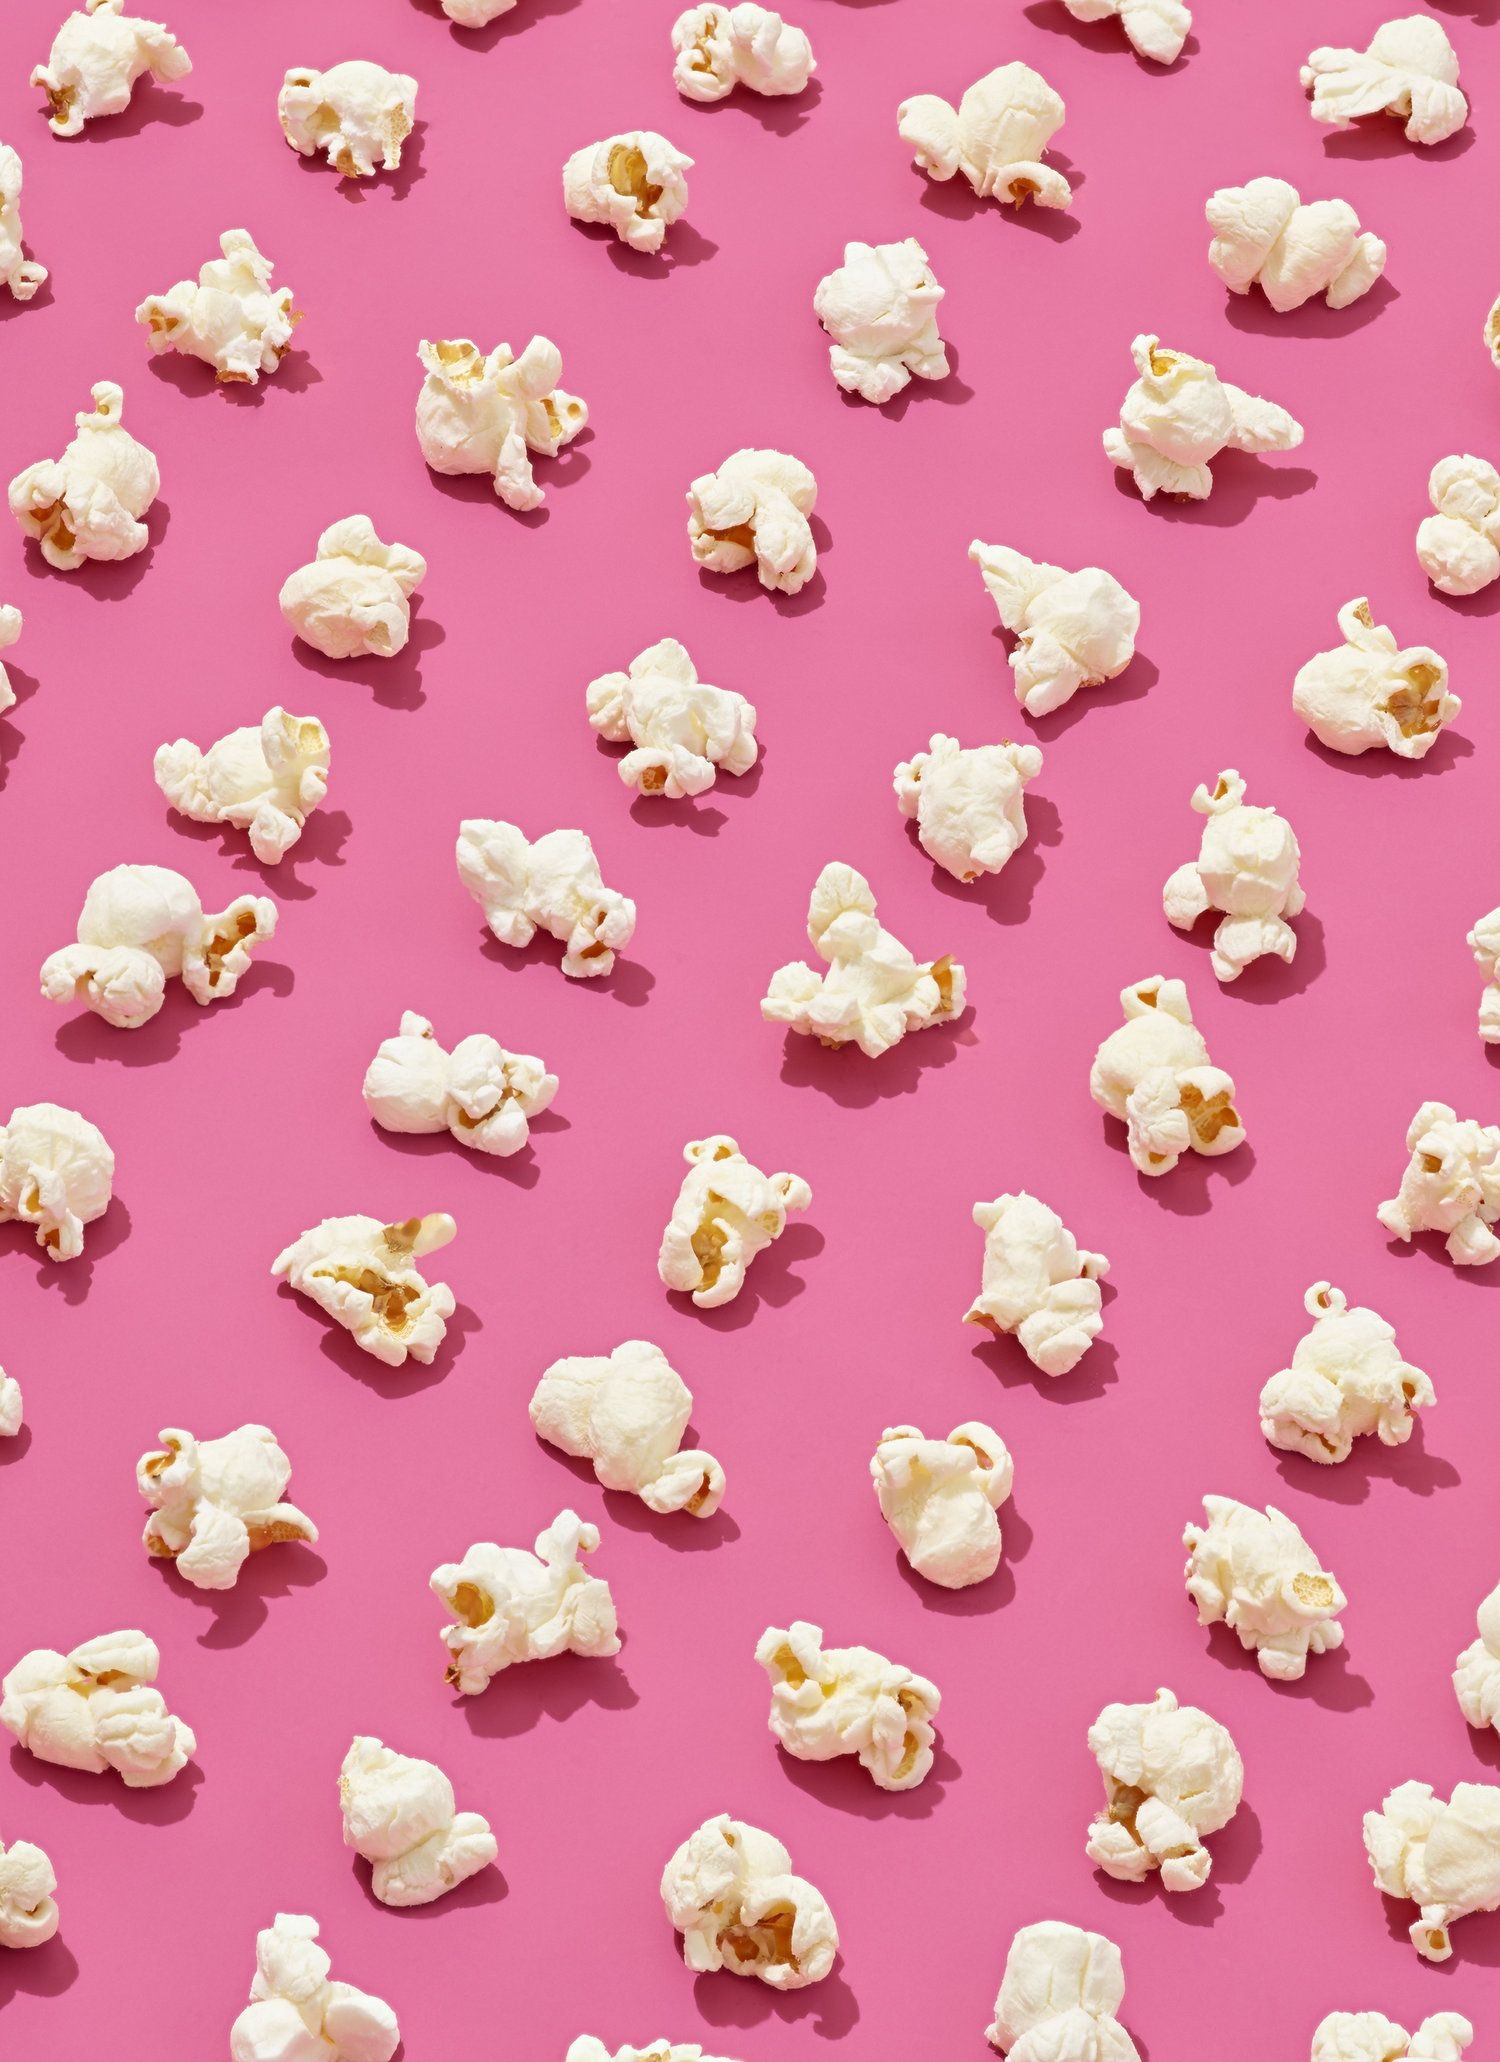 Popcorn in patterns, Creative food photography, Pattern photography, Artistic shot, 1500x2070 HD Handy